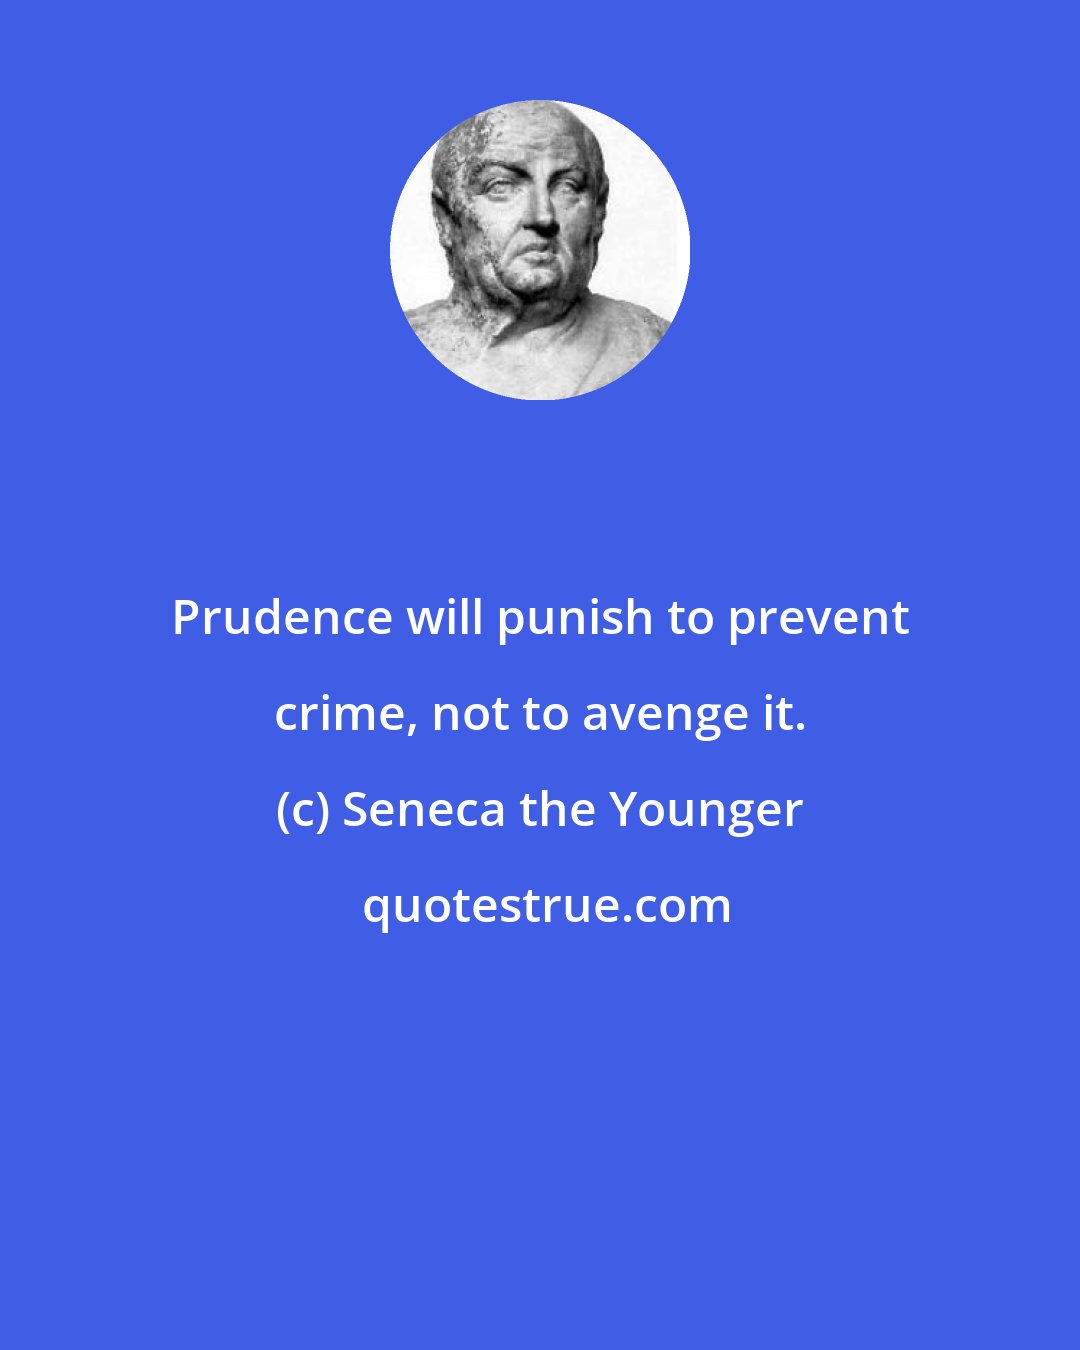 Seneca the Younger: Prudence will punish to prevent crime, not to avenge it.